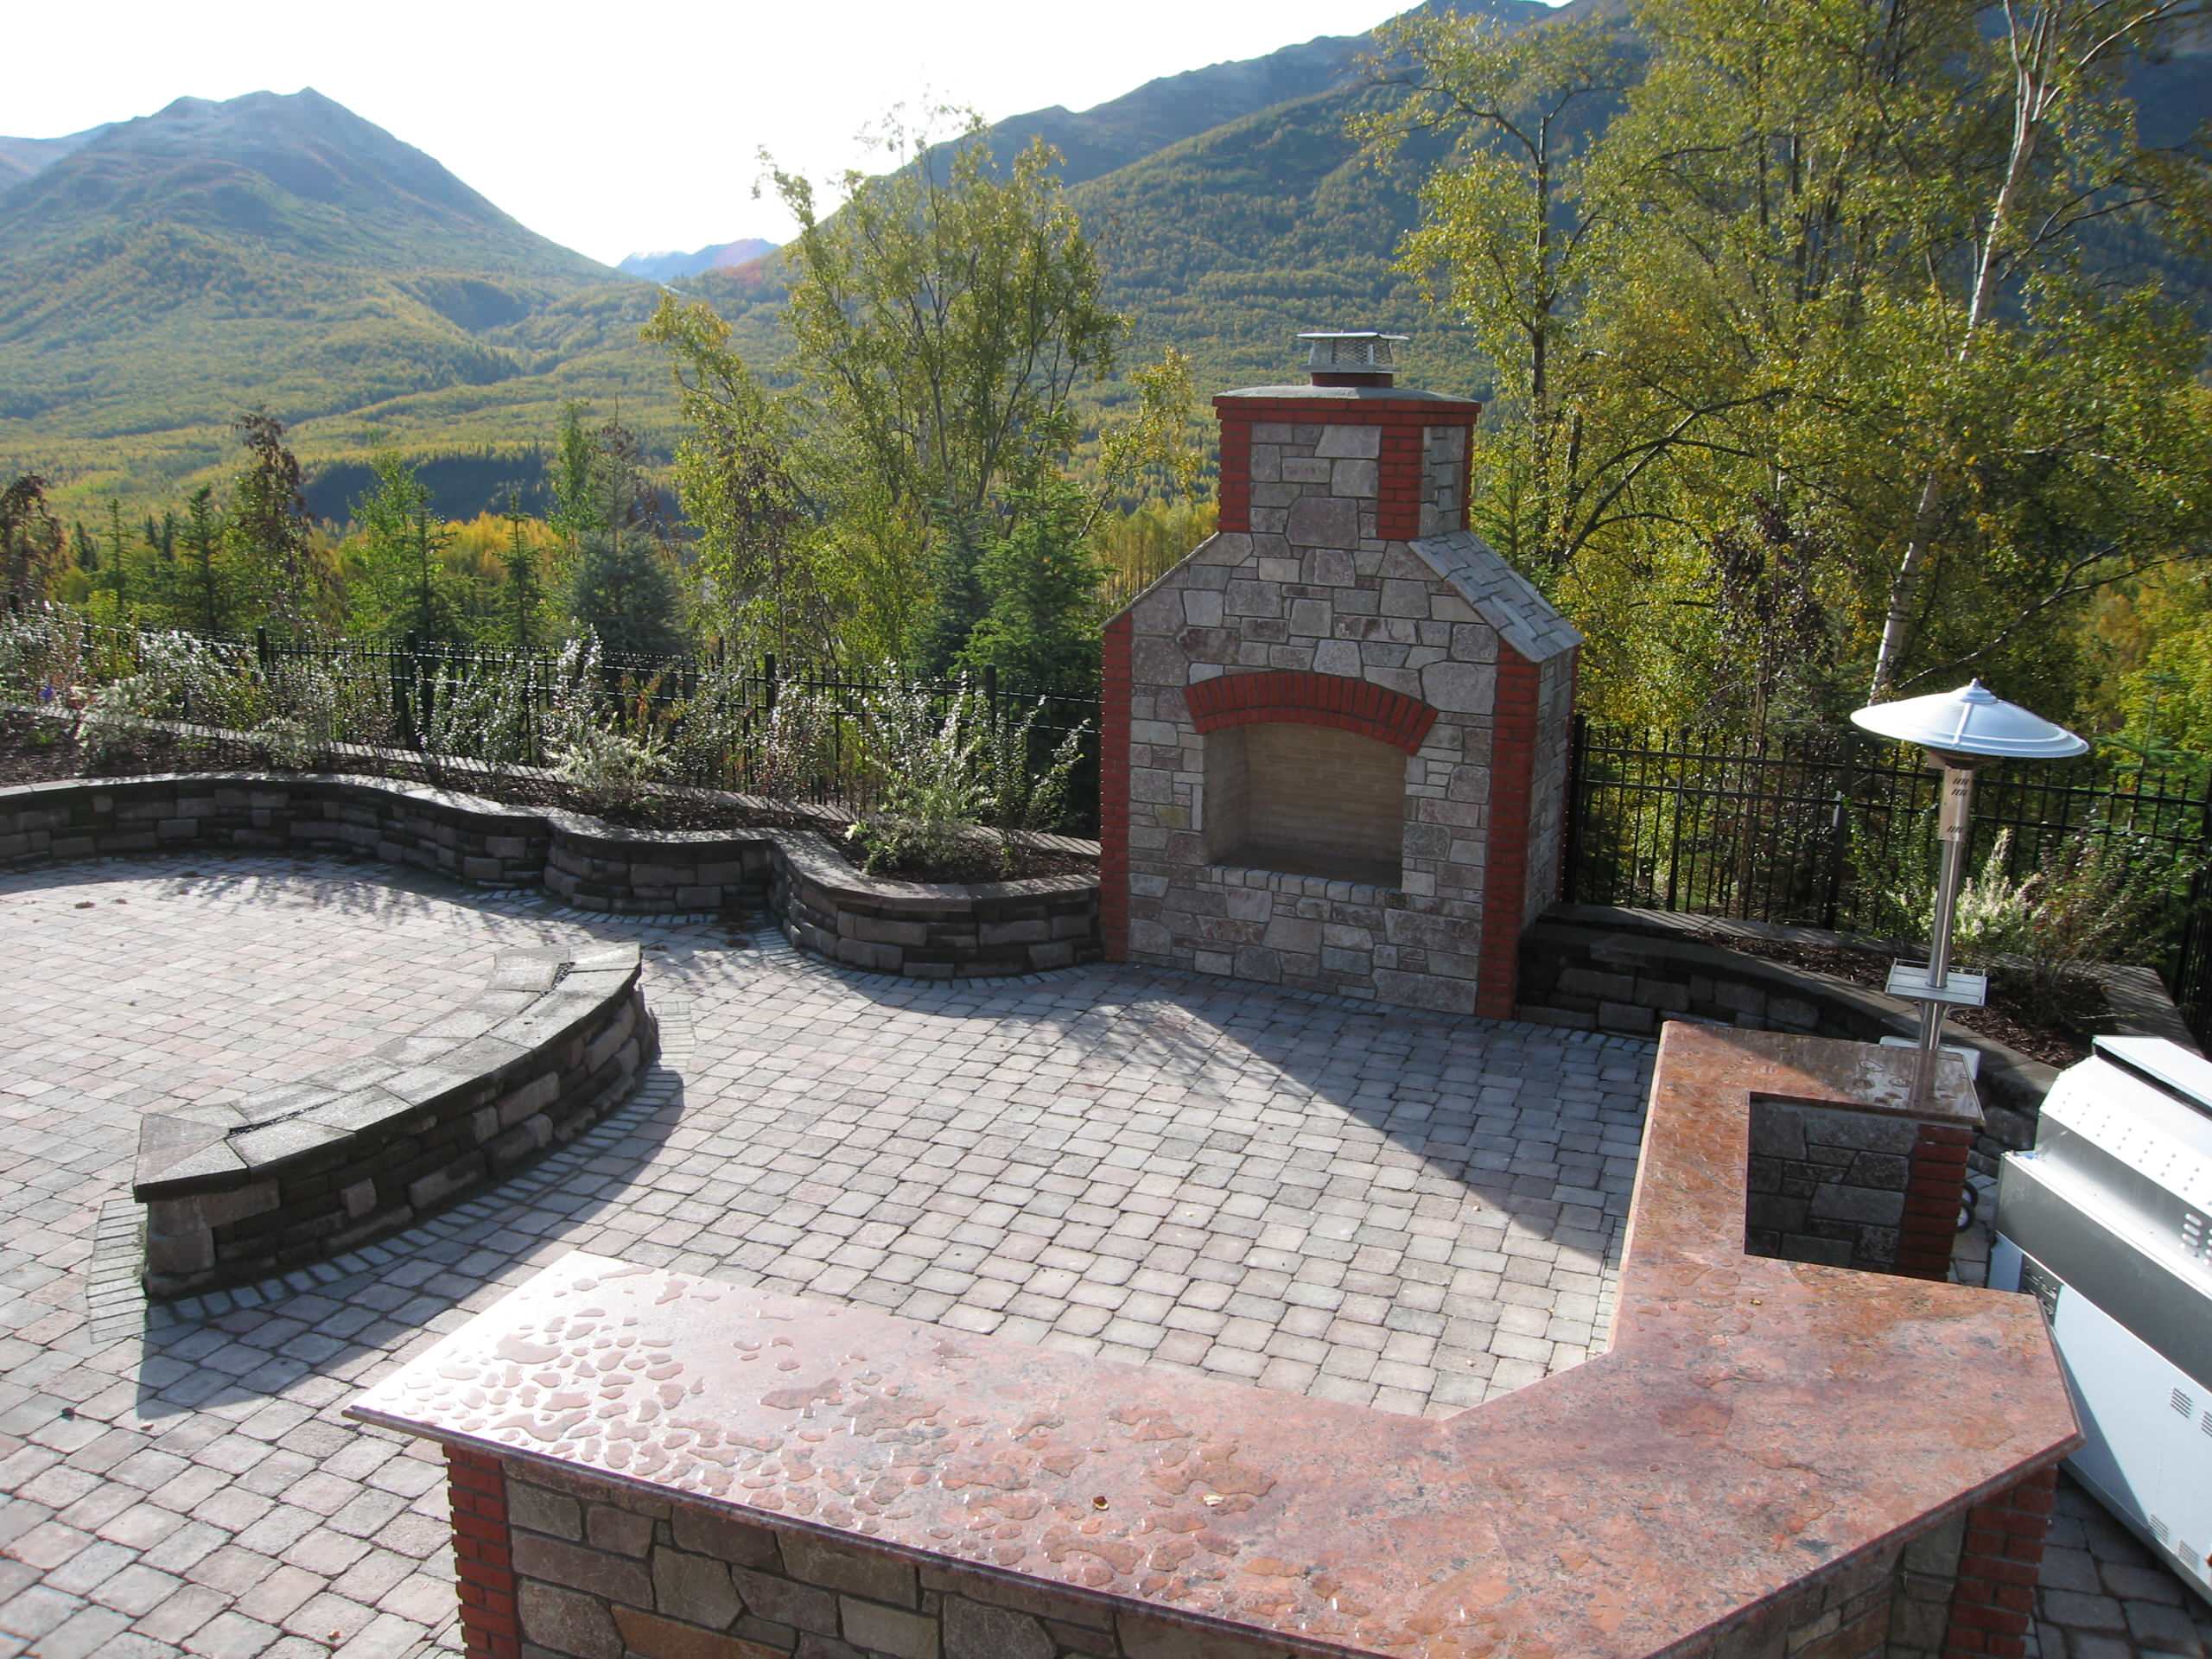 newly installed outdoor fireplace with magnificent views